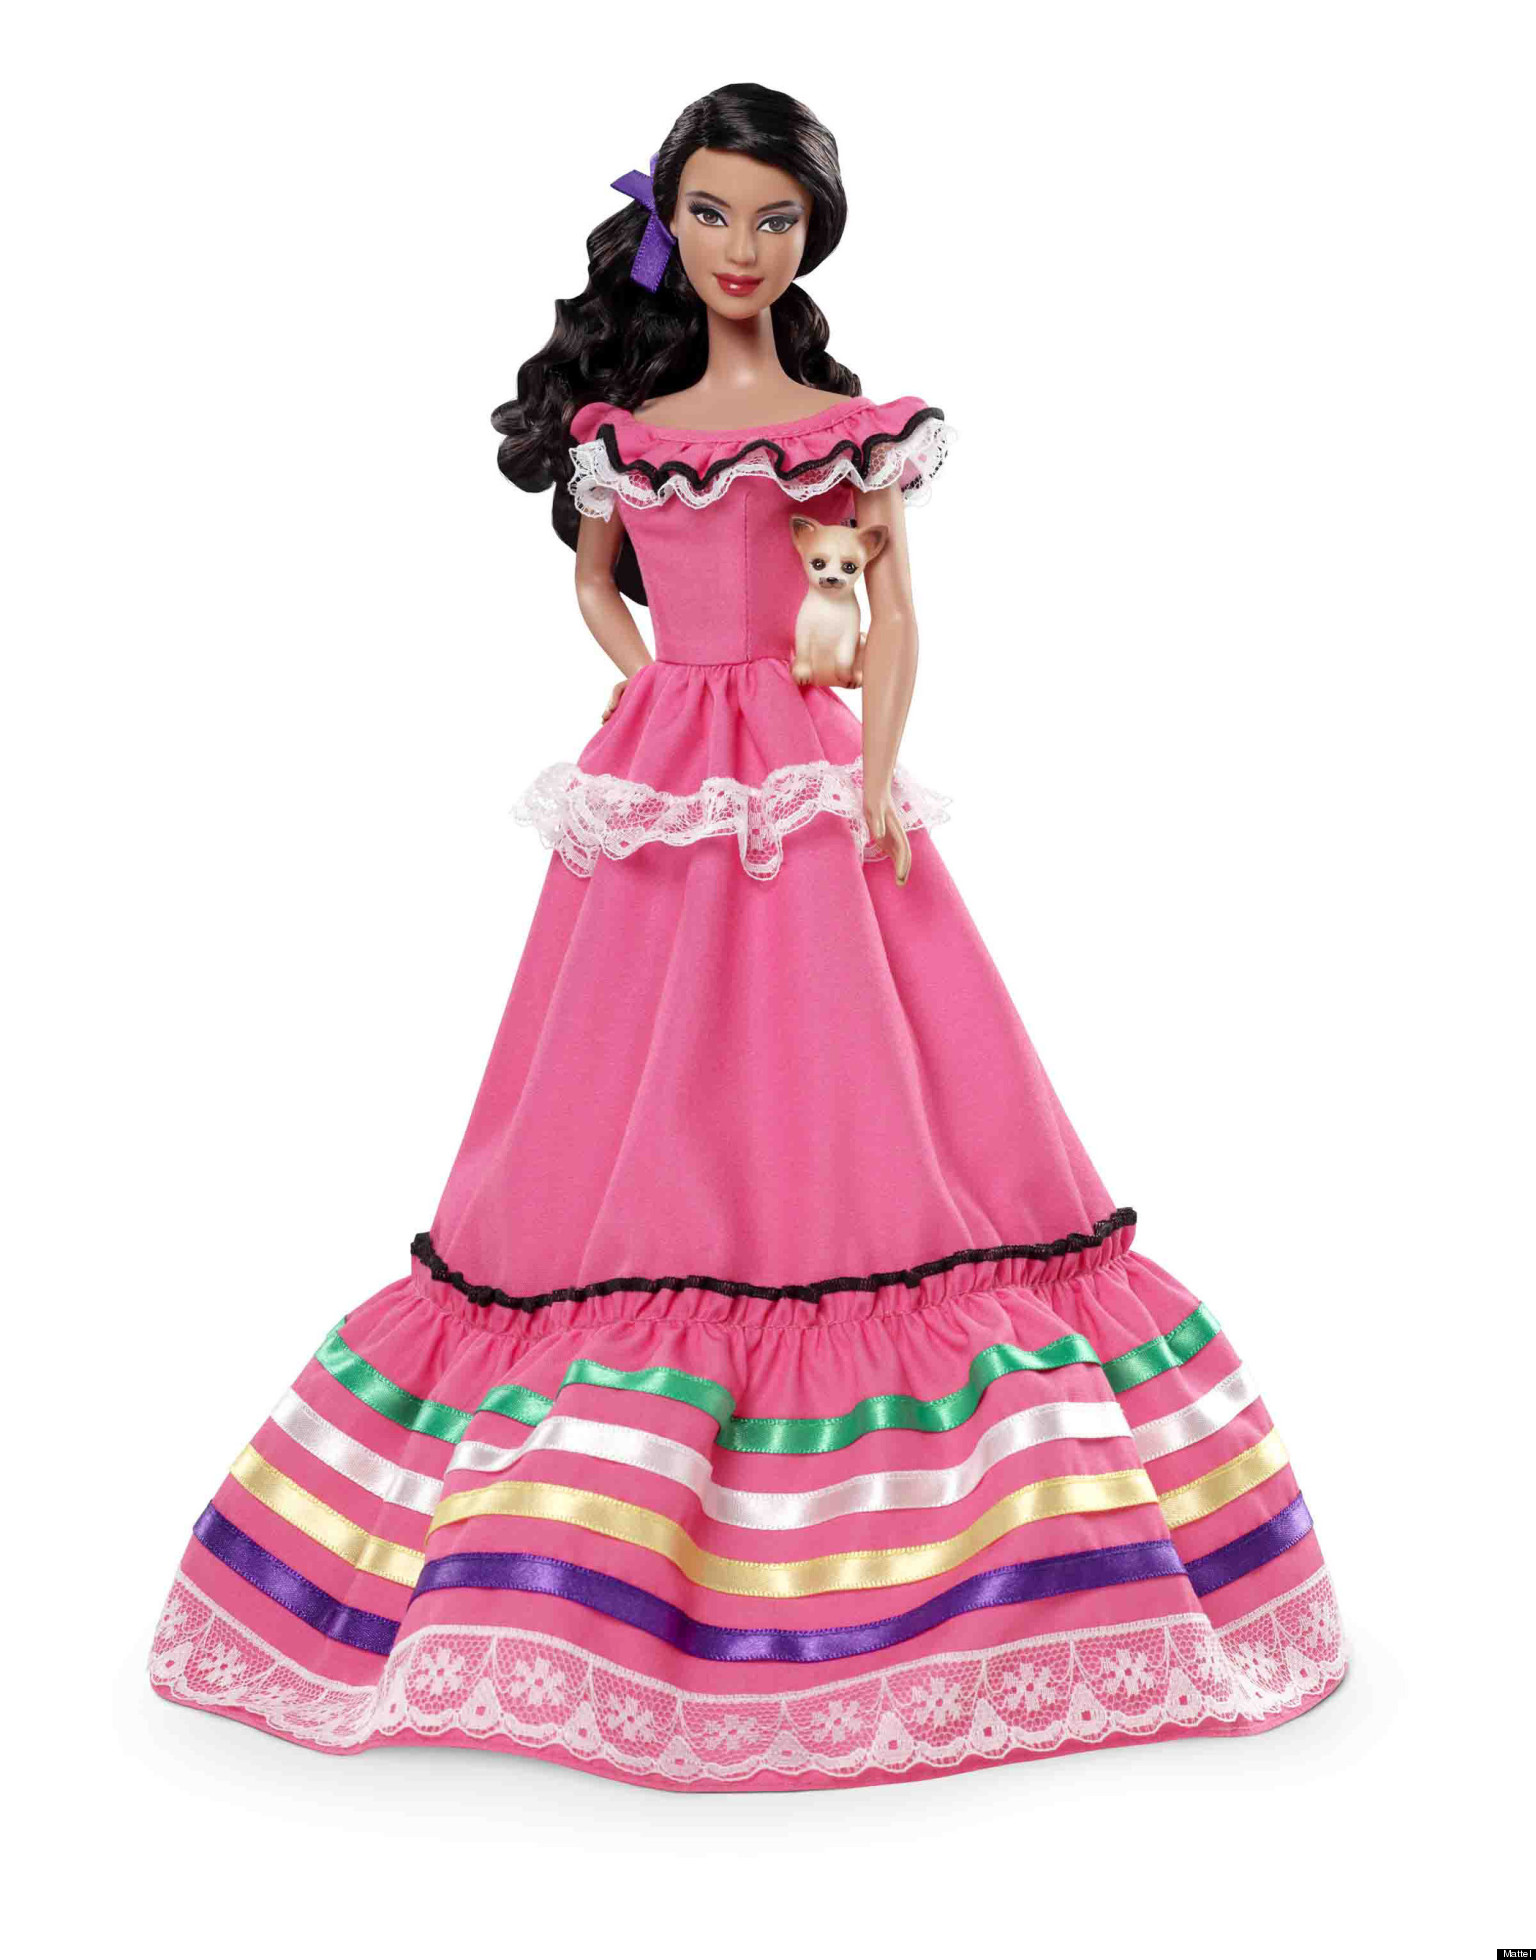 Mexico Barbie From 'Dolls Of The World' Collection Generates Backlash